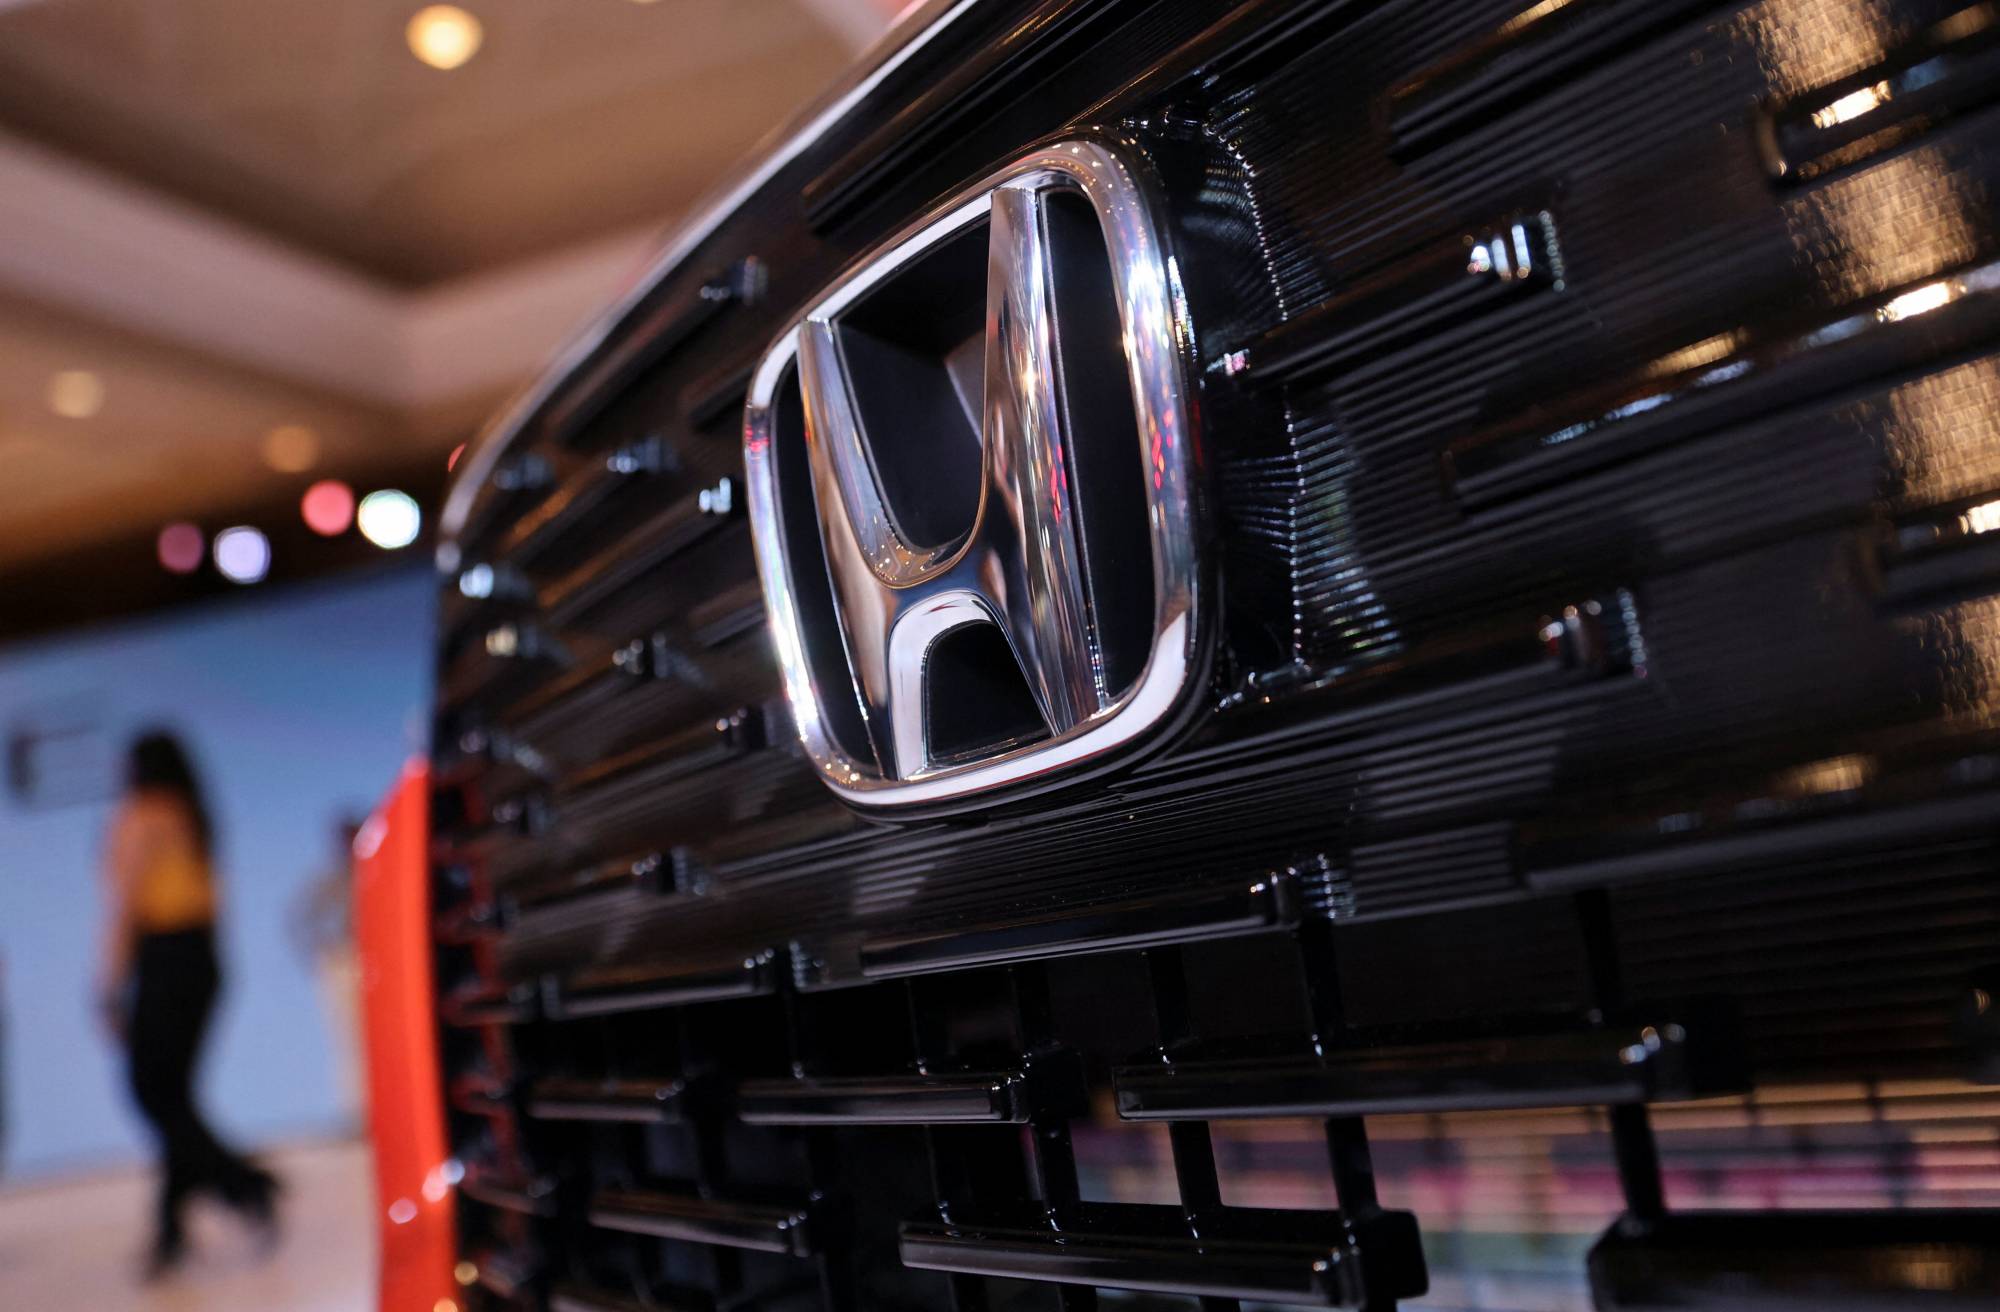 Honda is recalling 1.3 million vehicles worldwide due to a potential issue with the rearview camera image, the U.S. National Highway Traffic Safety Administration said Friday. | REUTERS